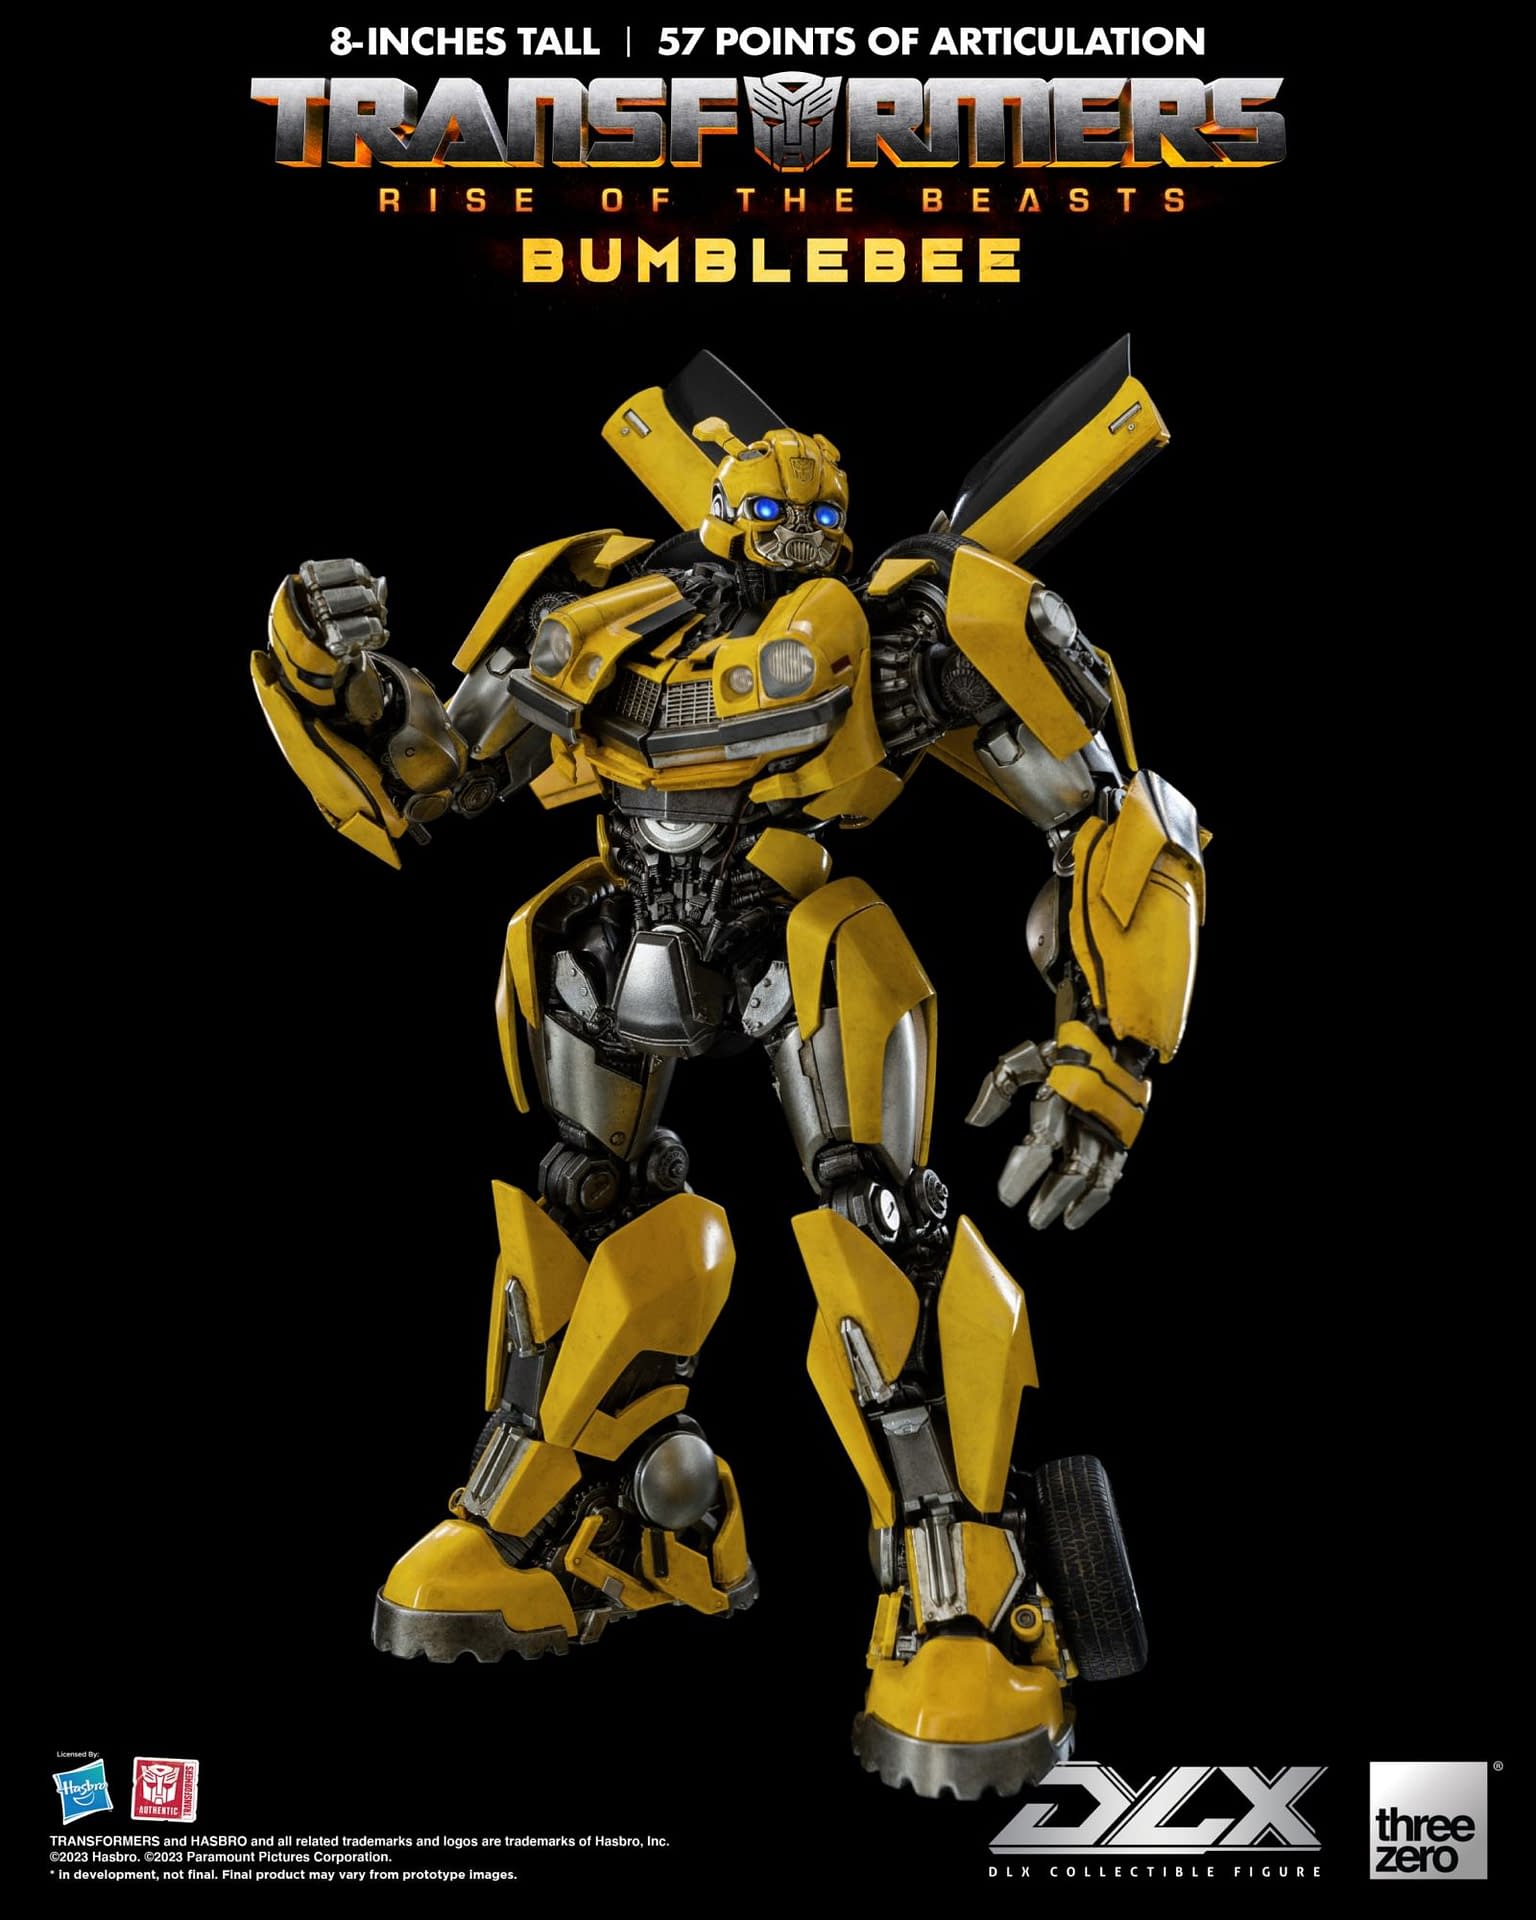 Transformers: Rise of the Beasts Bumblebee DLX Arrives from threezero